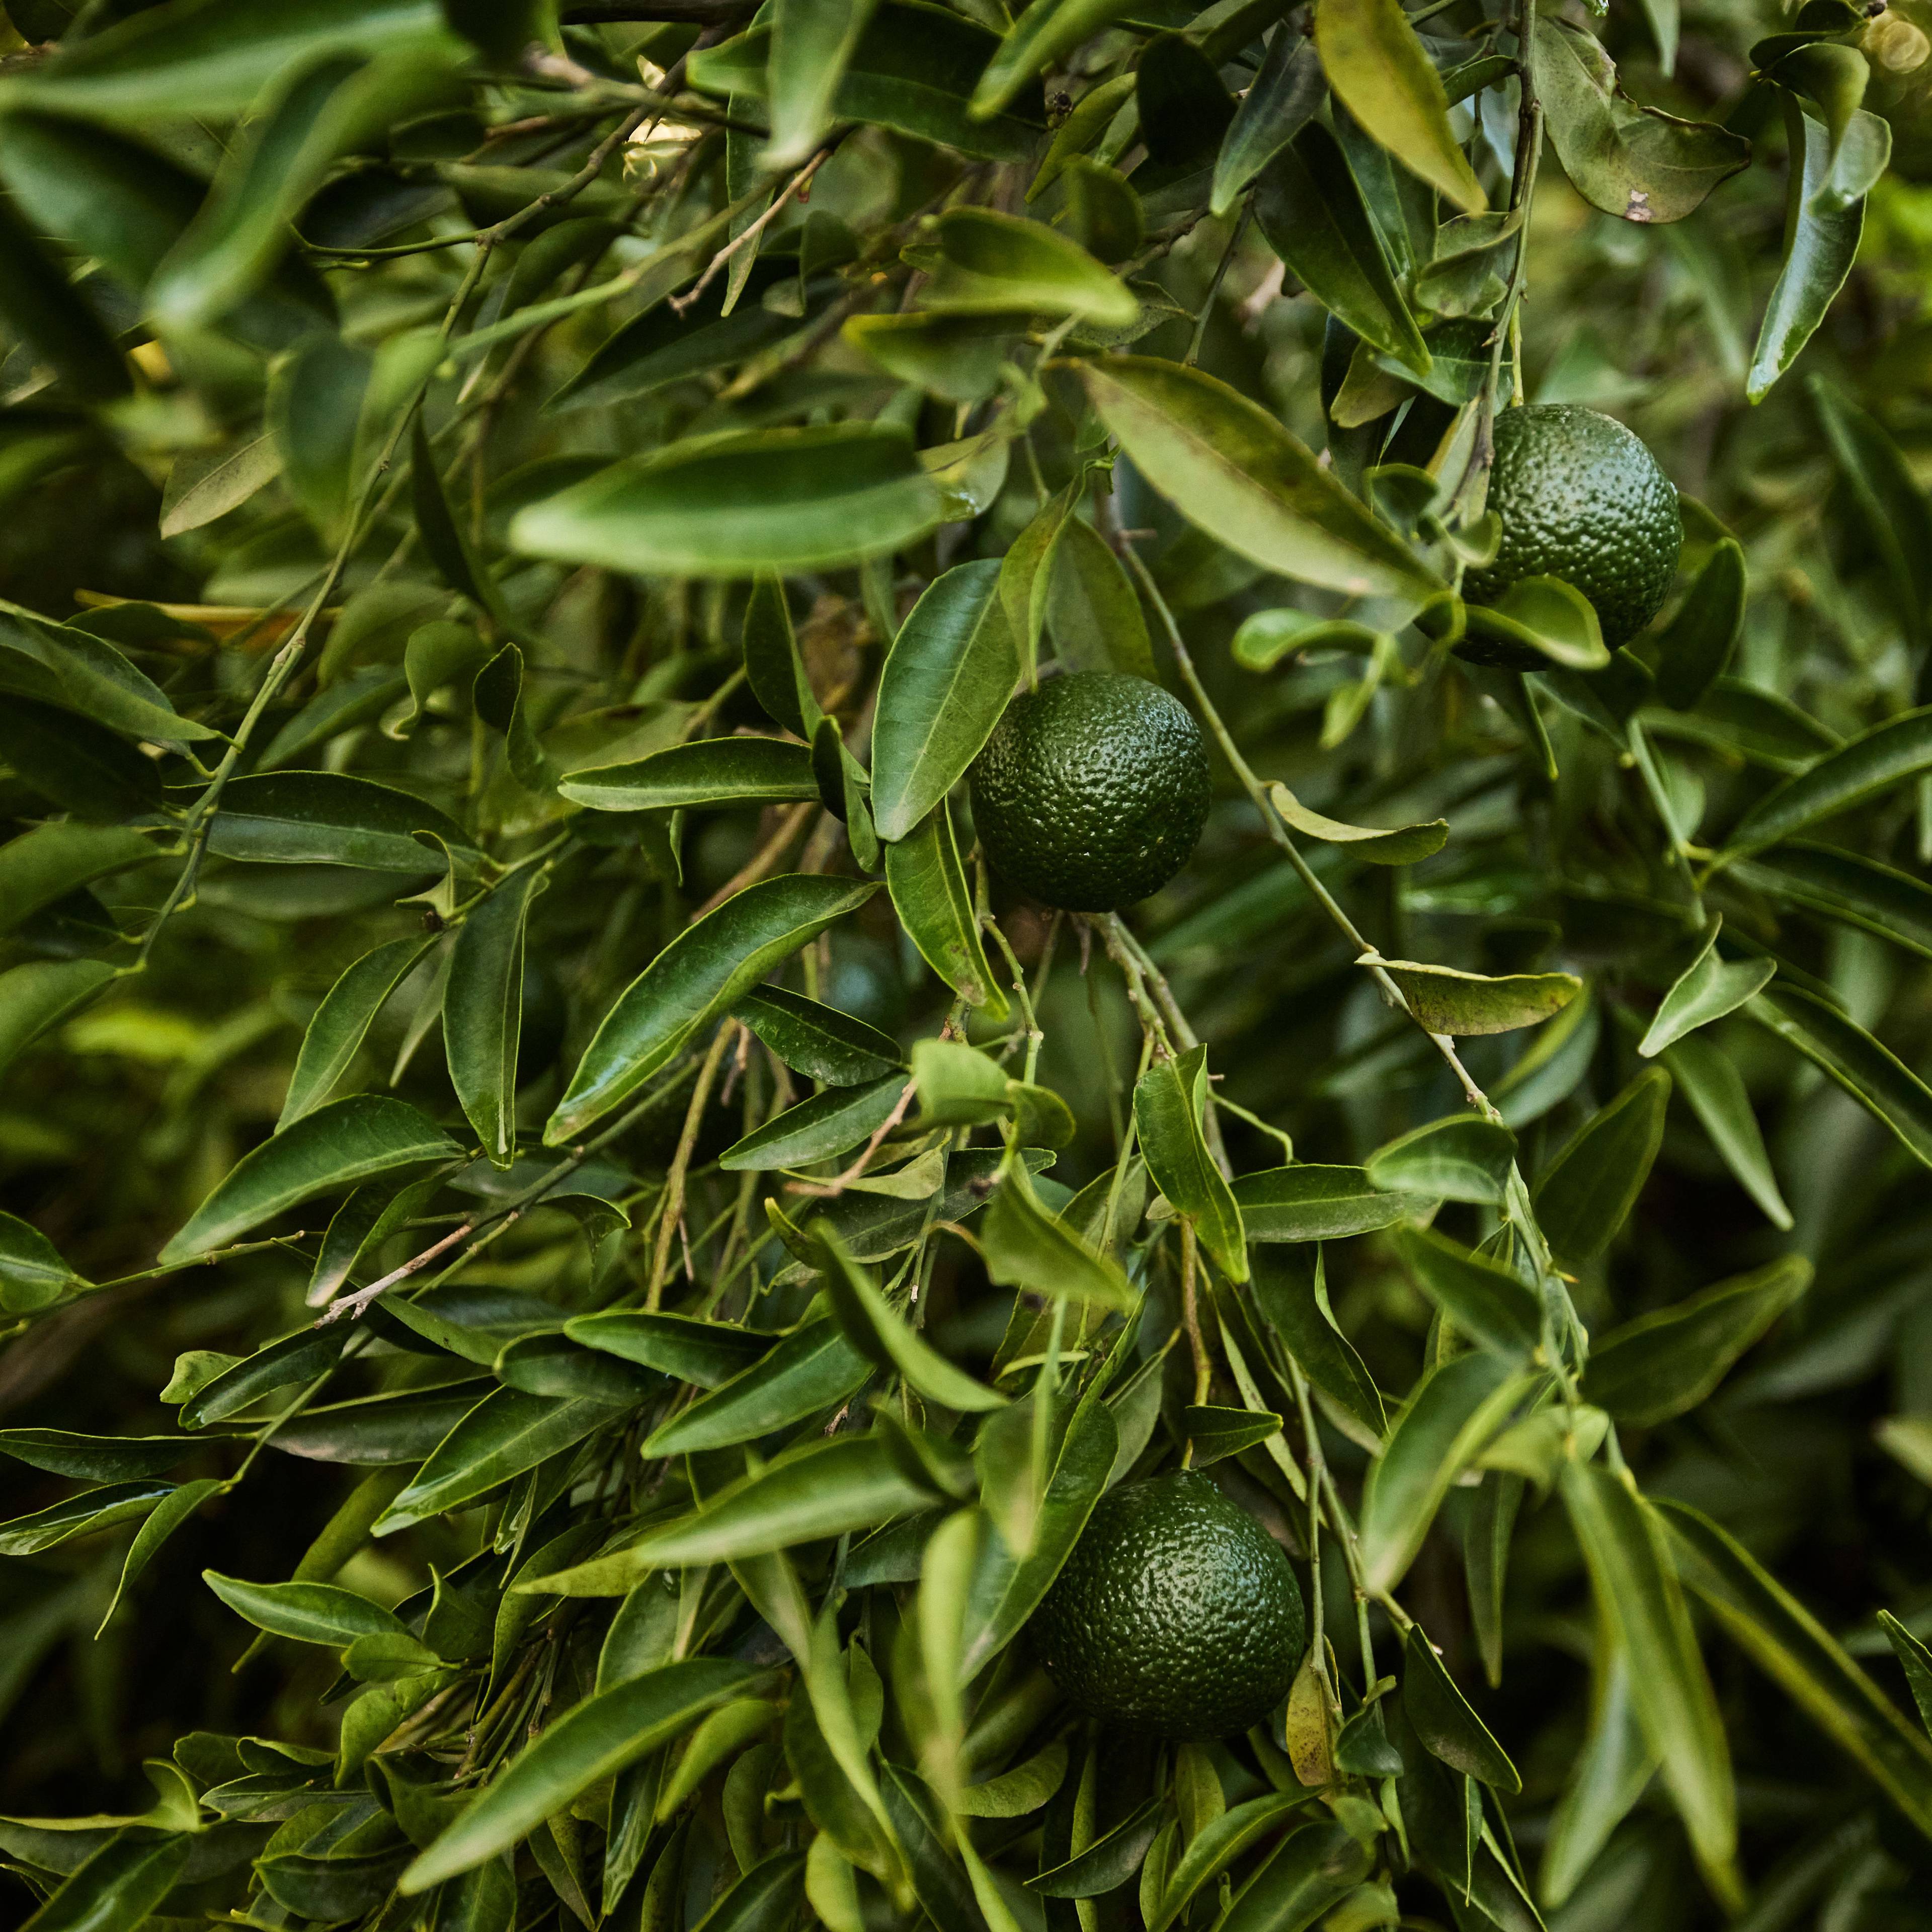 Green citrus growing on the tree